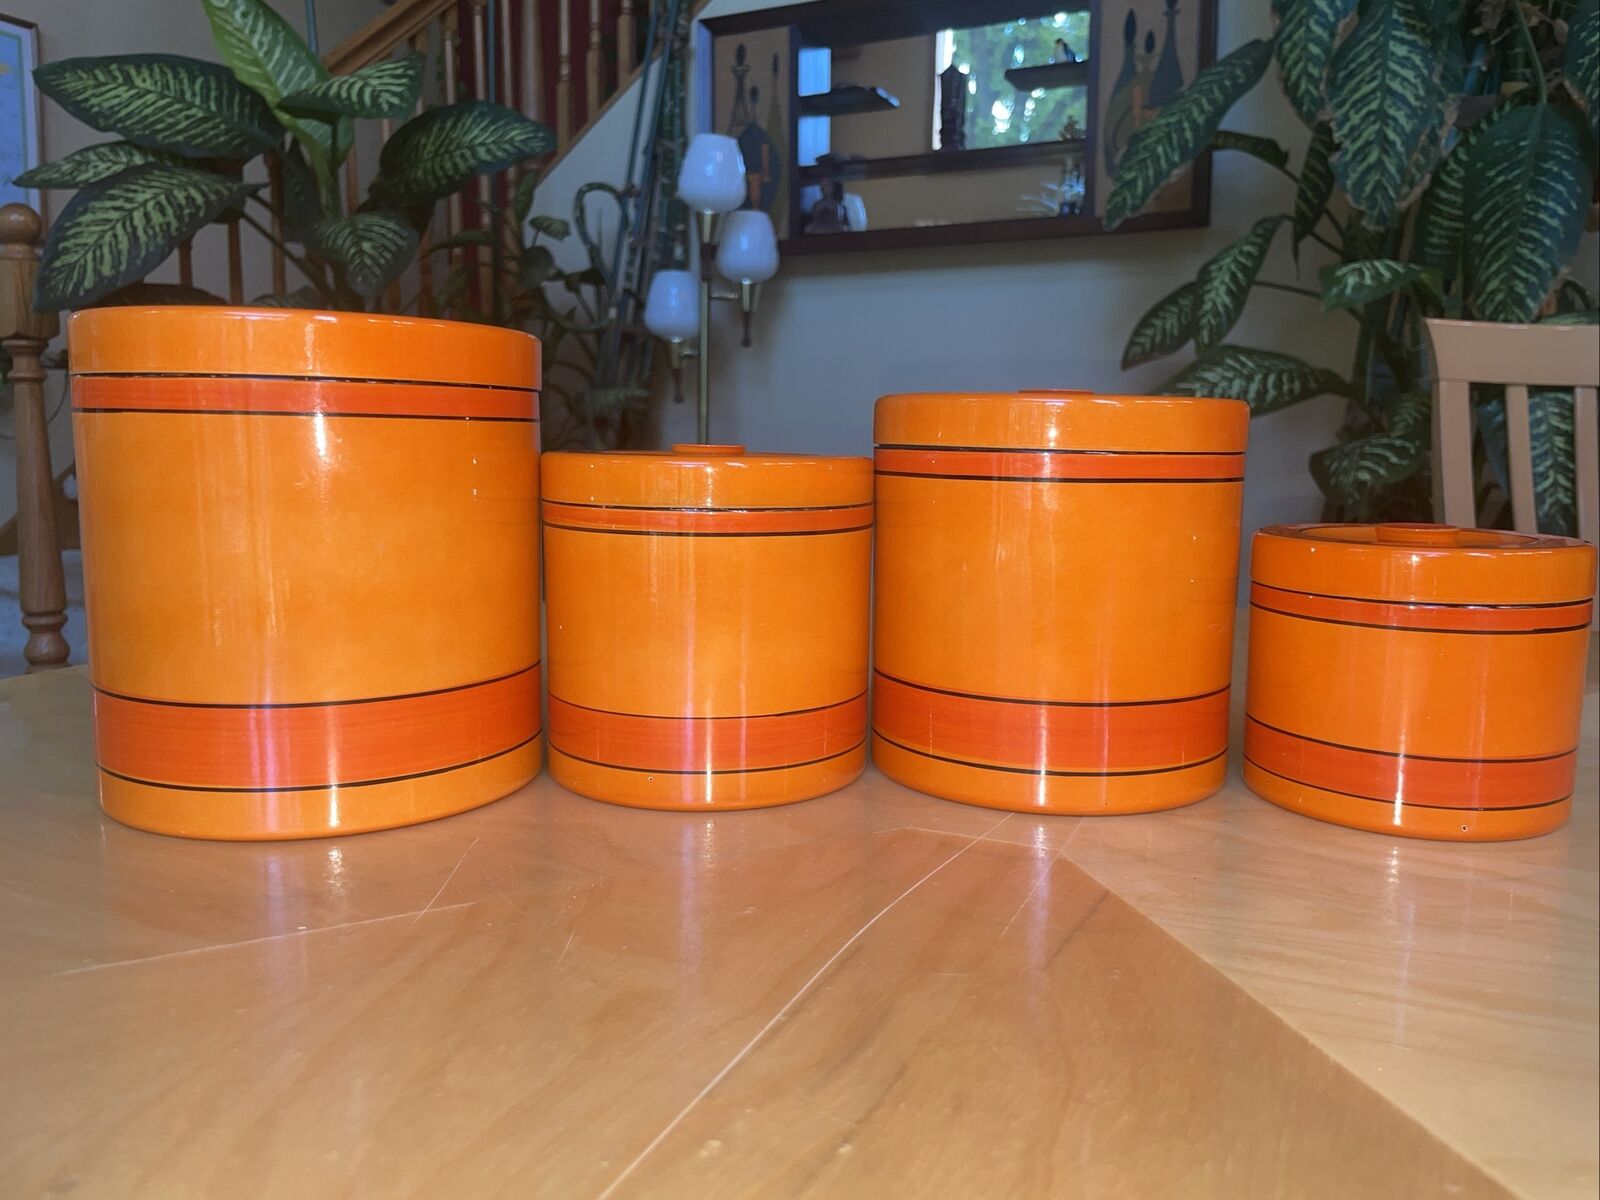 Vintage 1970s Orange Hand Painted Lacquerware Nesting Canister Set Of 4 Rare A+